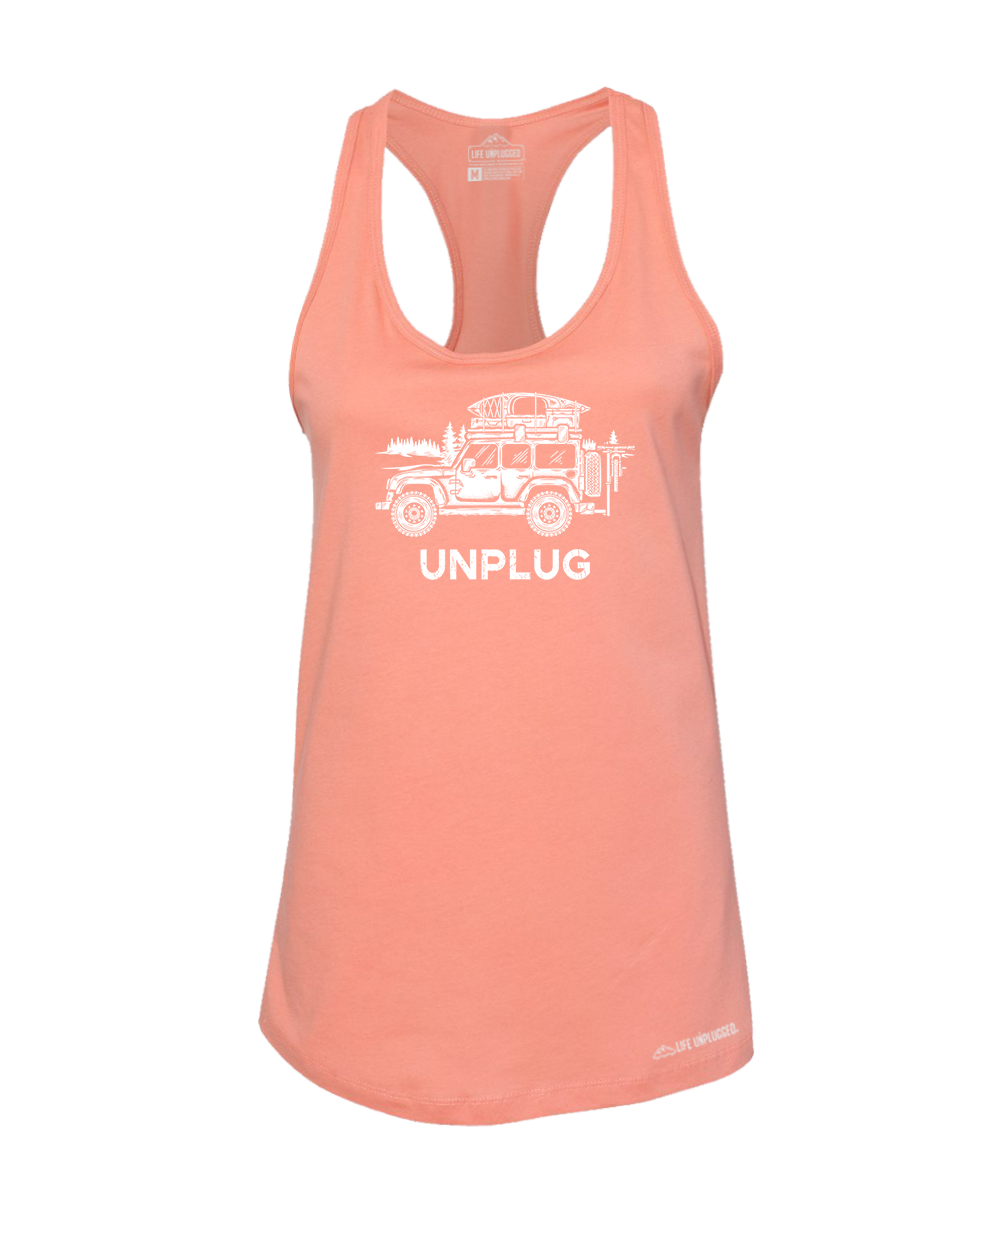 Off-road Vehicle Premium Women's Relaxed Fit Racerback Tank Top - Life Unplugged